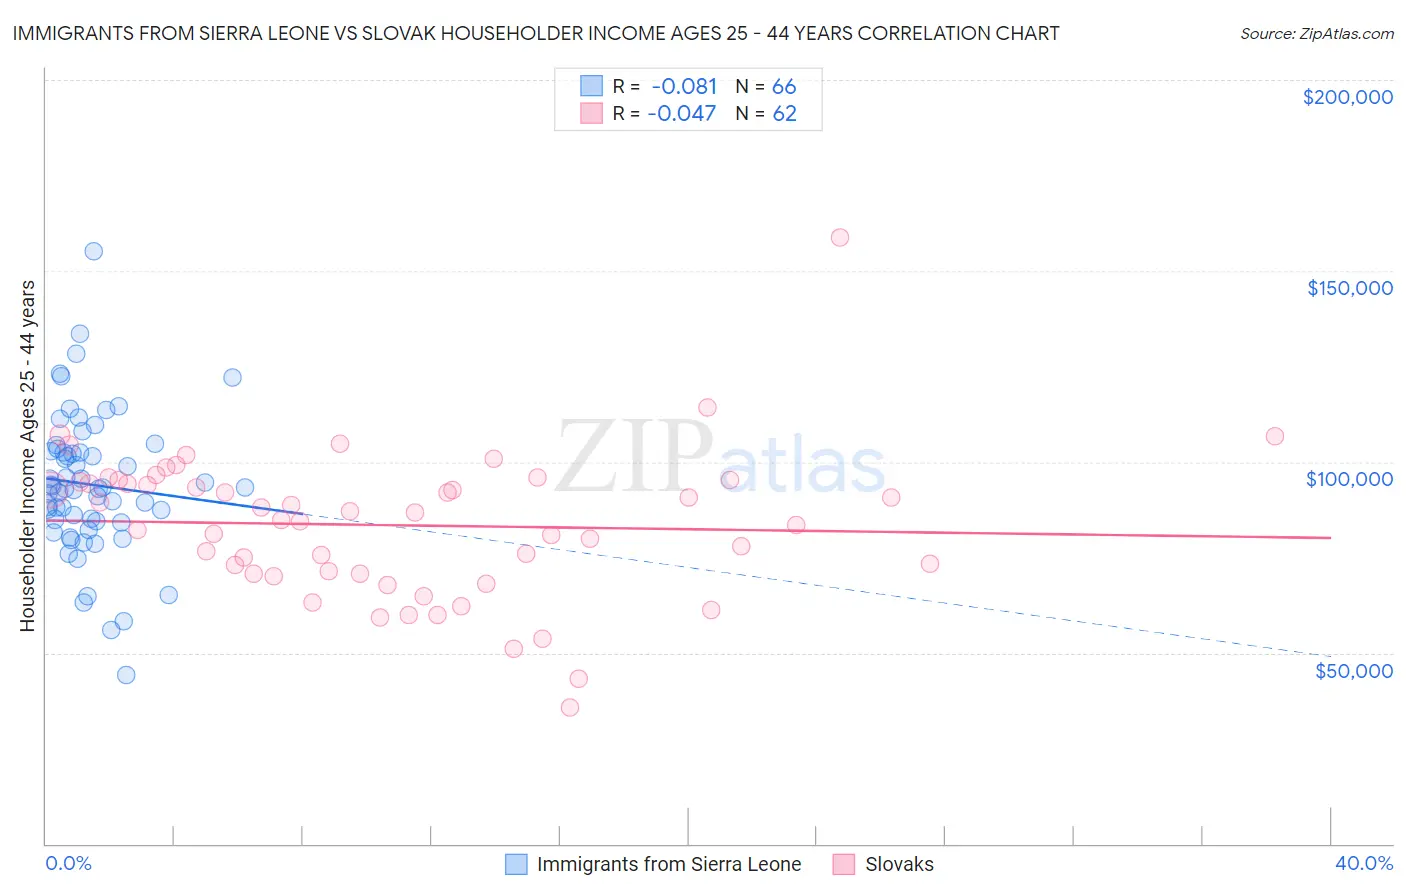 Immigrants from Sierra Leone vs Slovak Householder Income Ages 25 - 44 years